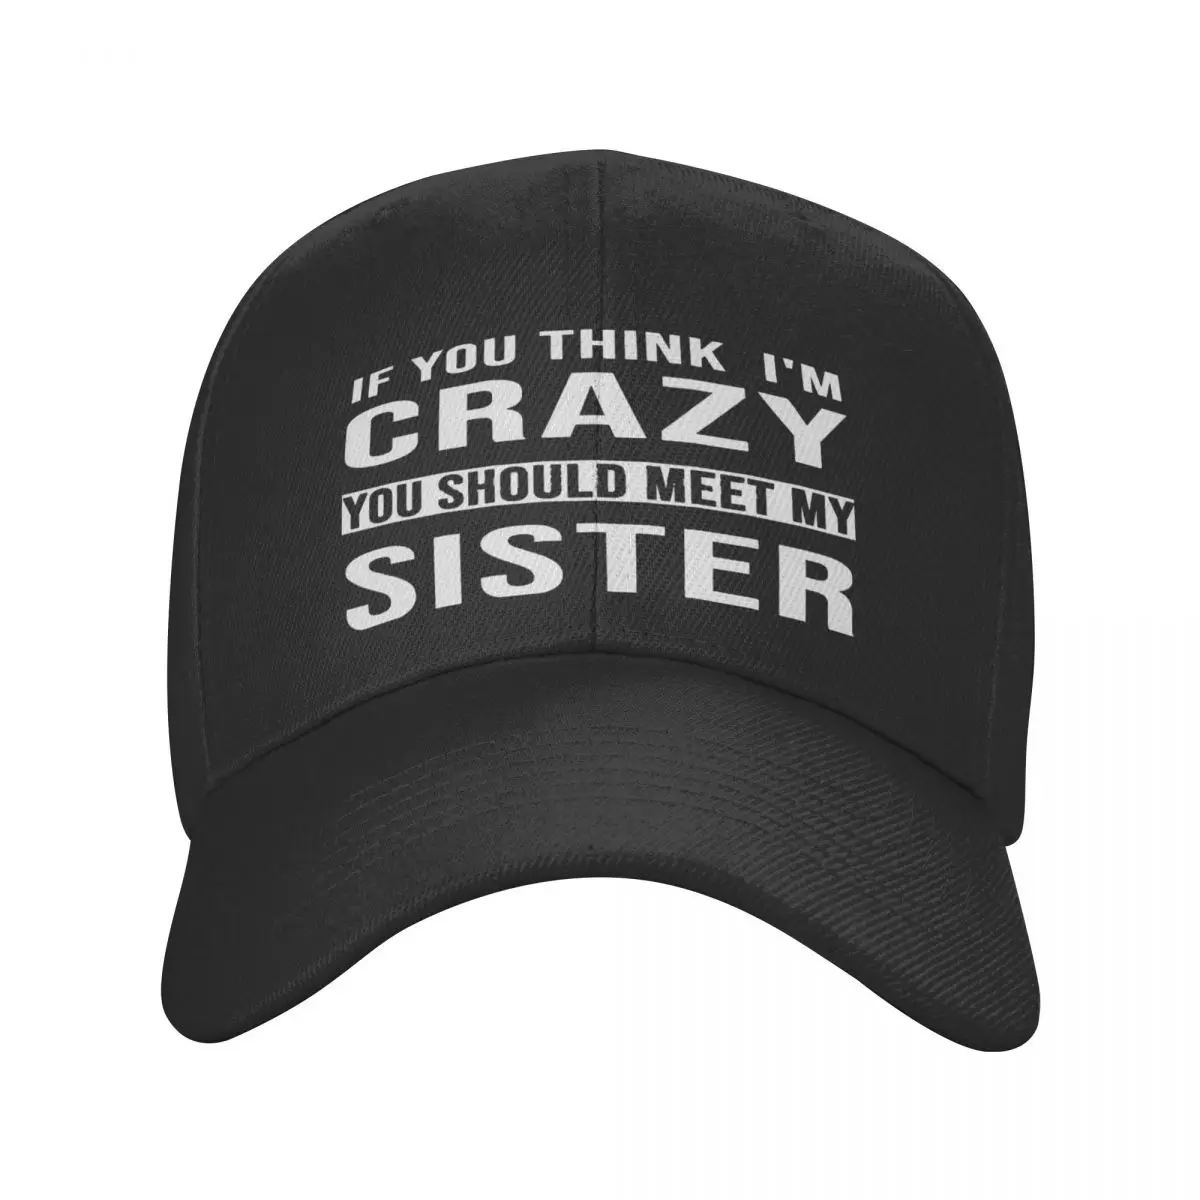 

F You Think I'm Crazy You Should Meet My Sister Casquette, Polyester Cap Trendy Hat Wicking Sports Nice Gift